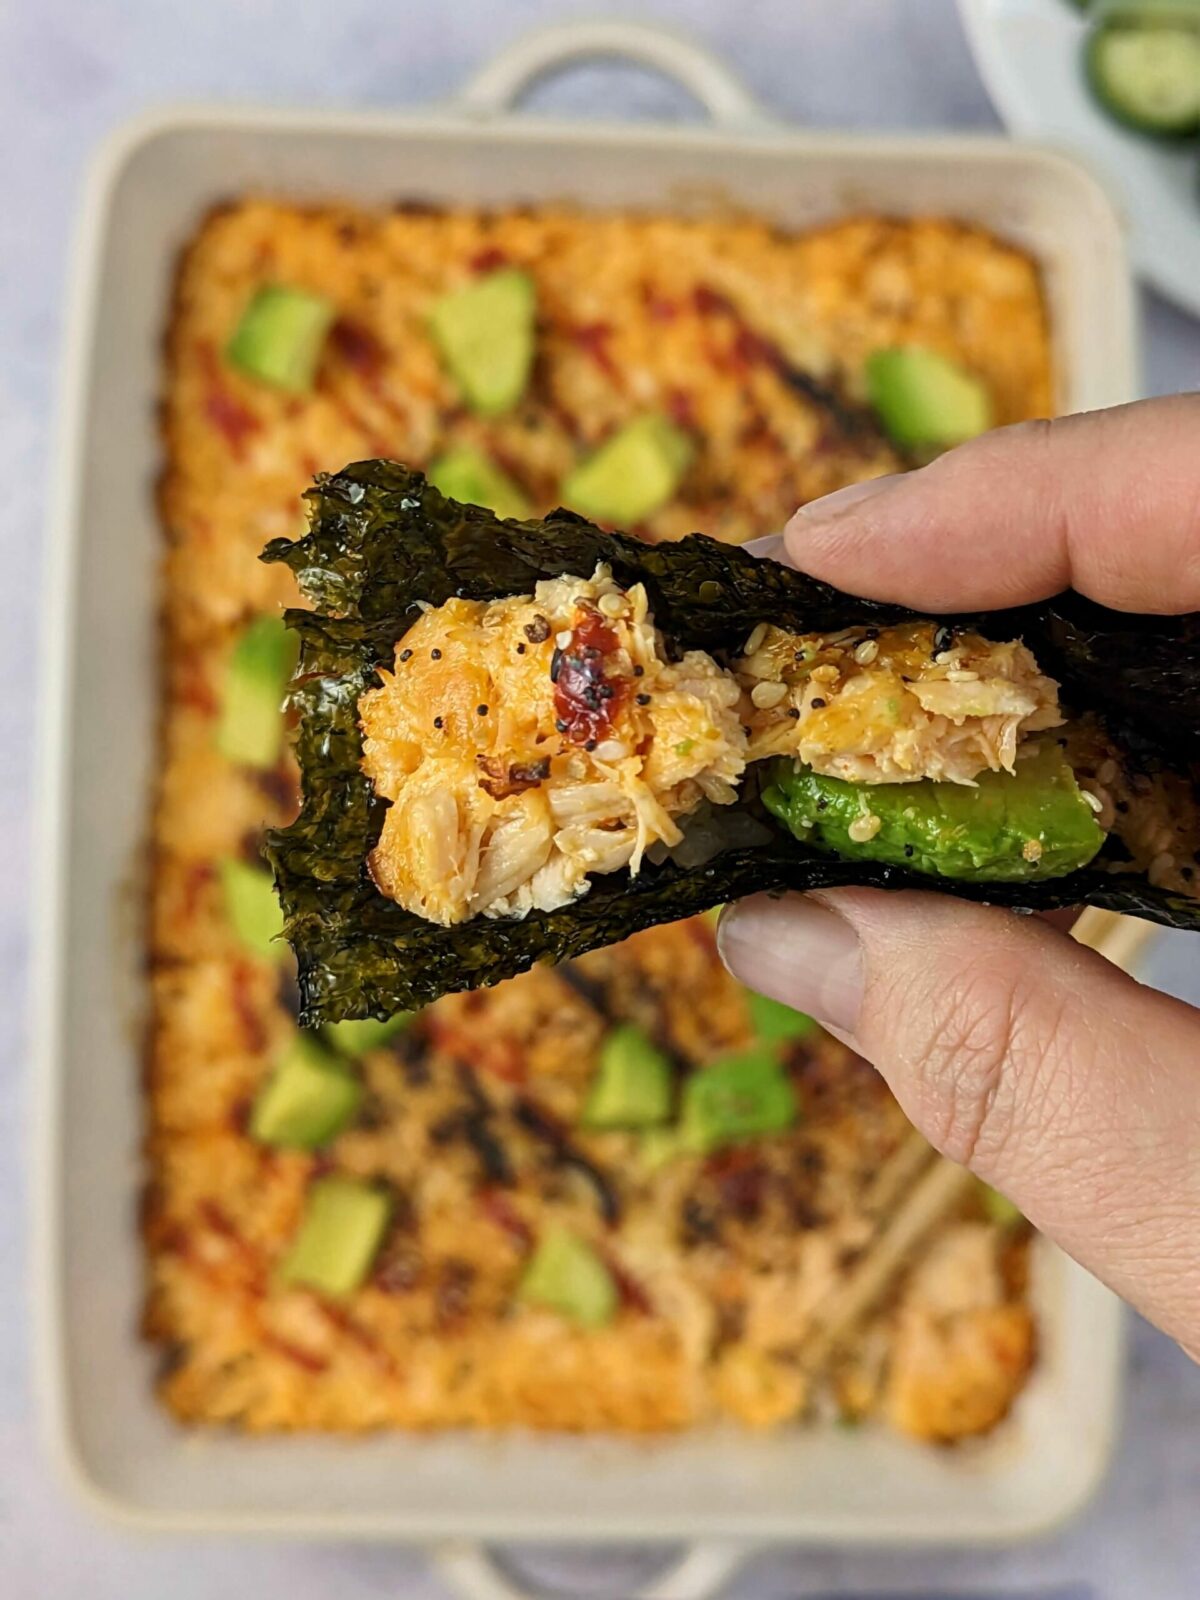 Our salmon sushi bake recipe topped with diced avocado and furikake.